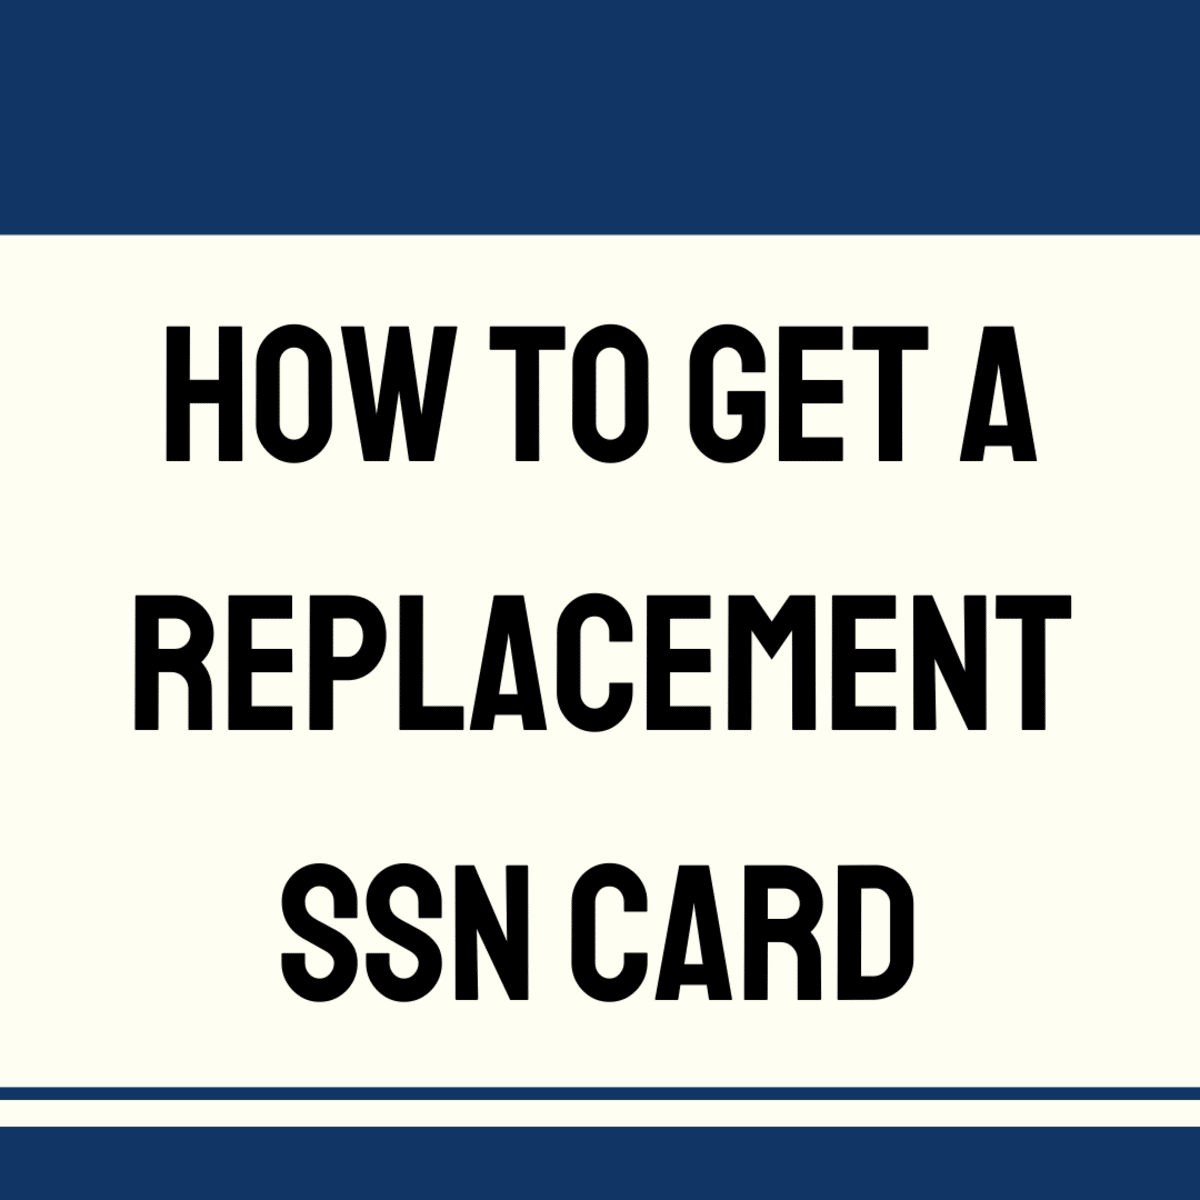 How to Replace a Lost or Stolen Social Security Card